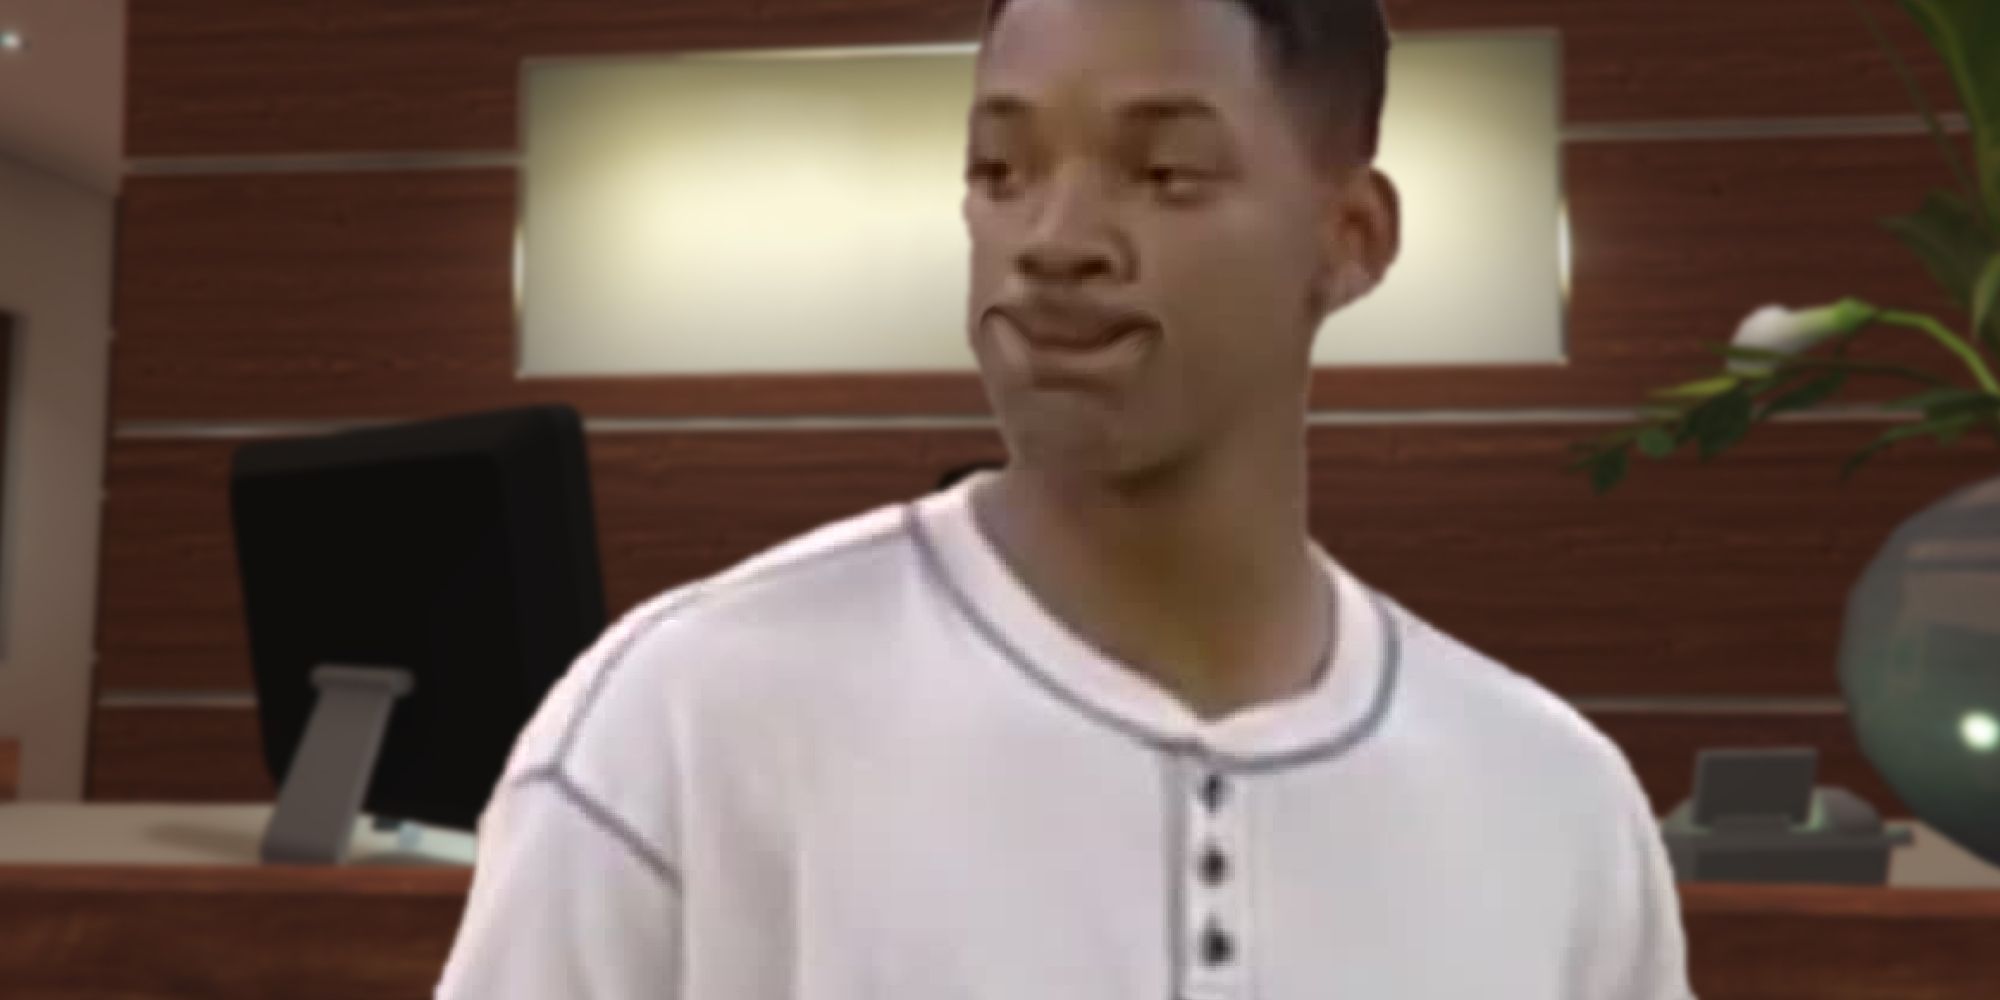 an office in gta online with will smith looking around with an upside down smile